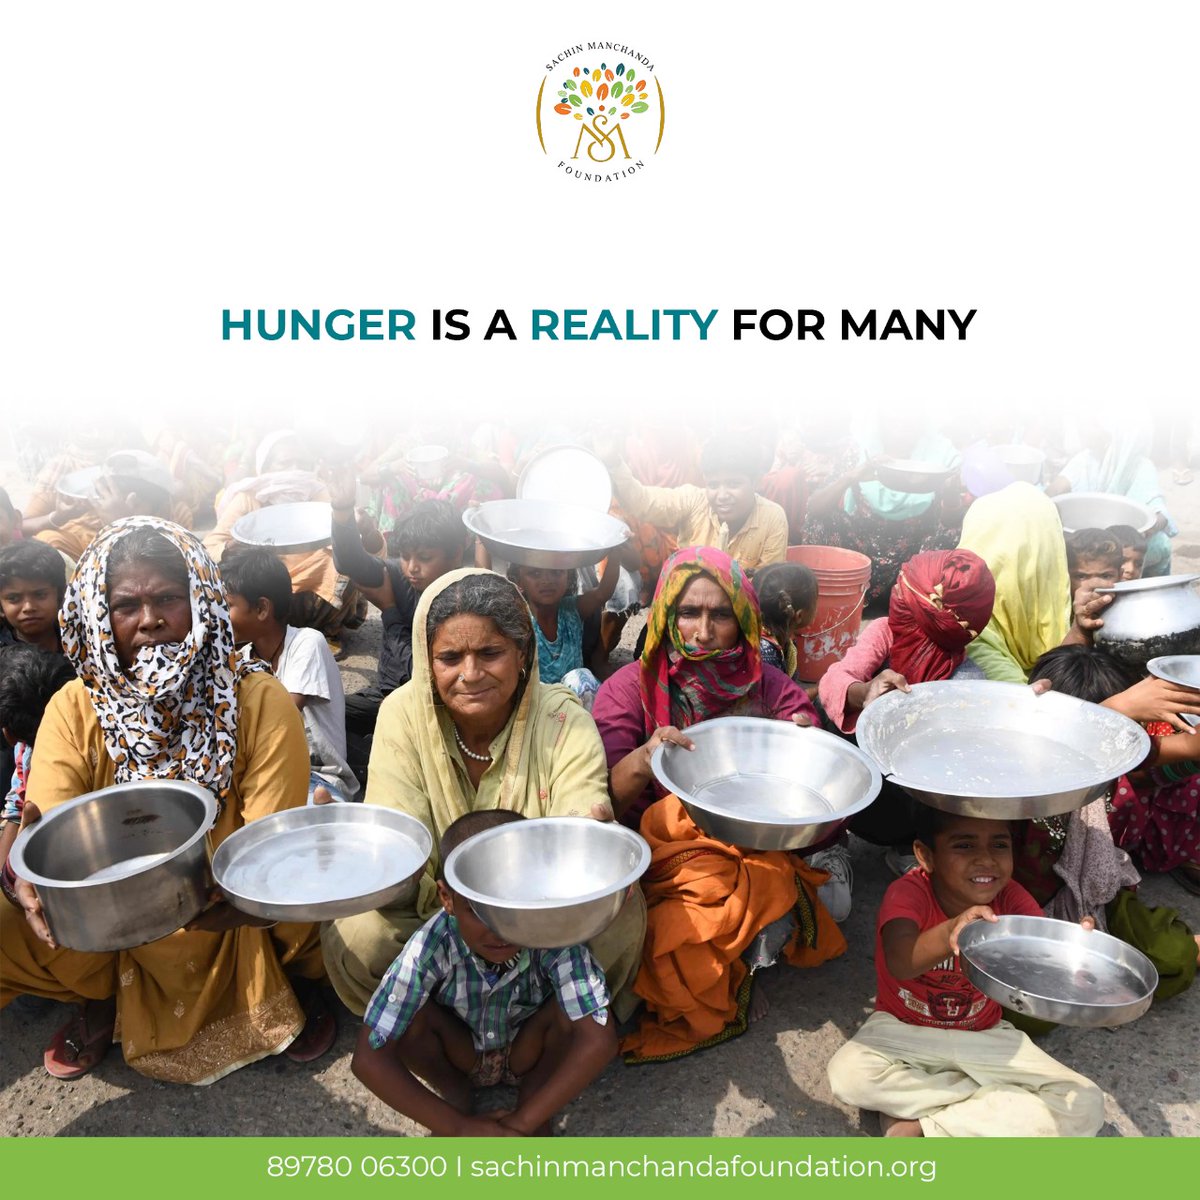 Let's come together to ensure that no one goes to bed #hungry and put a stop to this #social evil. @SMF_INDIA

#SachinManchandaFoundation #SachinManchanda #SMFoundation #SMF #ManchandaFoundation 

#food #fooddistribution #donation #helppeople #helpingneedy #needypeople #poor